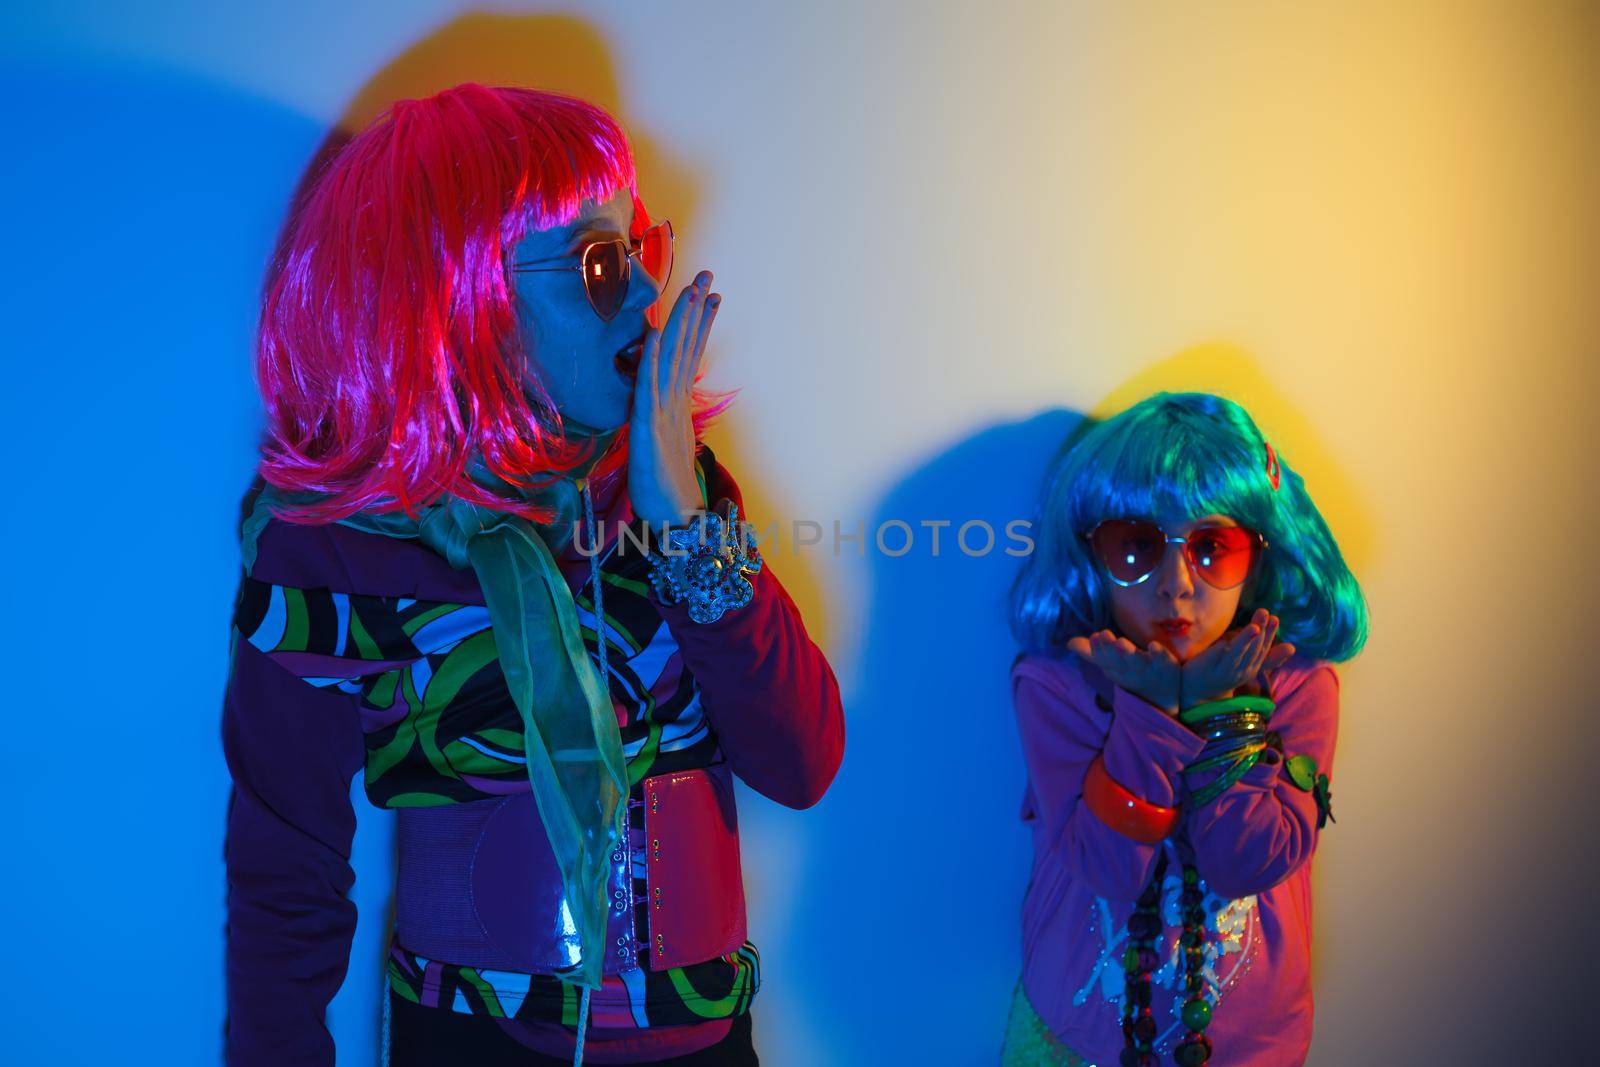 Two little girls blowing kiss wearing a colorful wig and heart-shaped sunglasses posed for a photo shooting on the disco light background